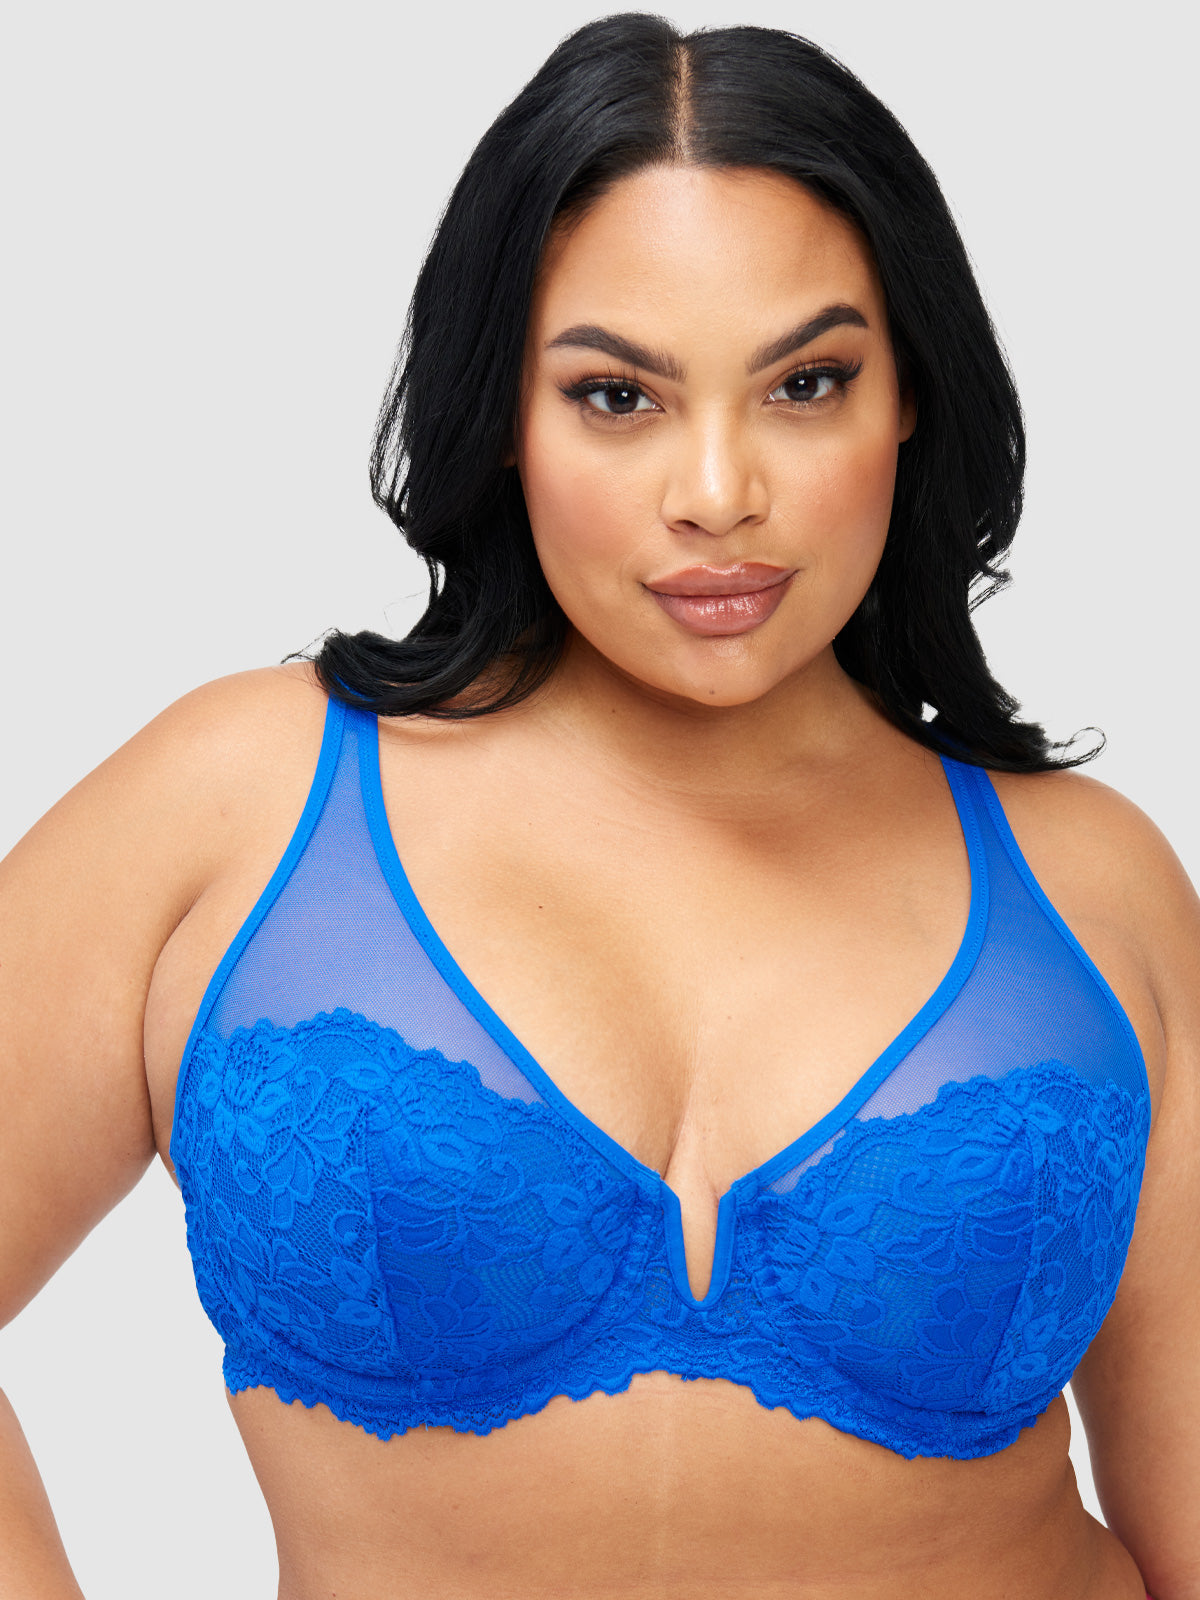 C C's Lingerie & Bridal Bras (MrBra.com) on X: No size is too small! Find  the bra size of your favorite #Hollywood celebrity by clicking the blue  link below  #mrbra #lingerieplussize